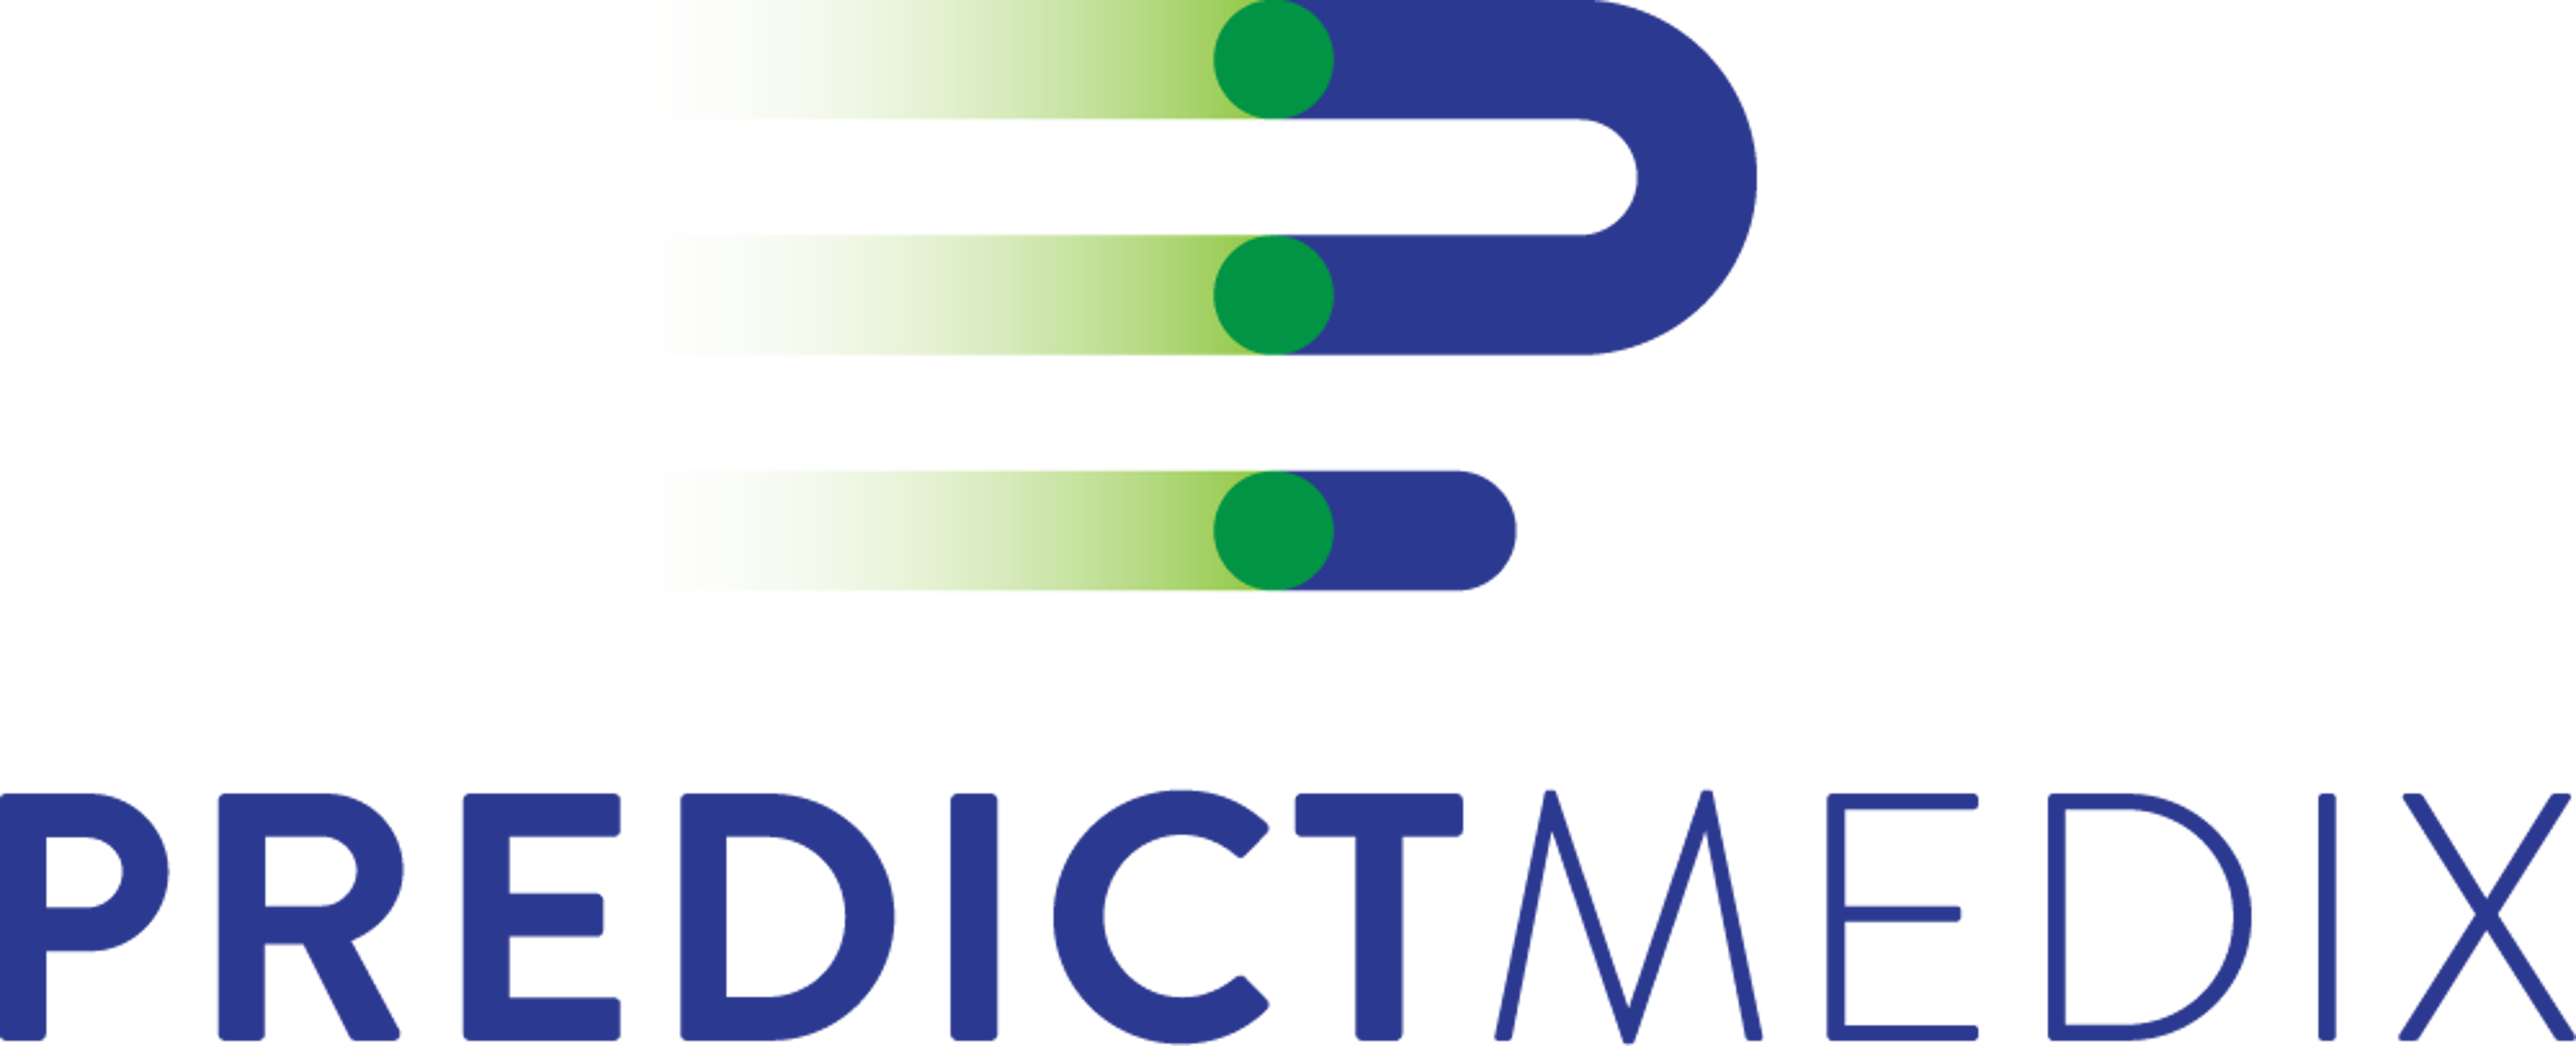 EXCLUSIVE: Predictmedix Receives $1.85M LOI For 80 Safe Entry Stations From KaTron Defence Space And Simulation Technologies